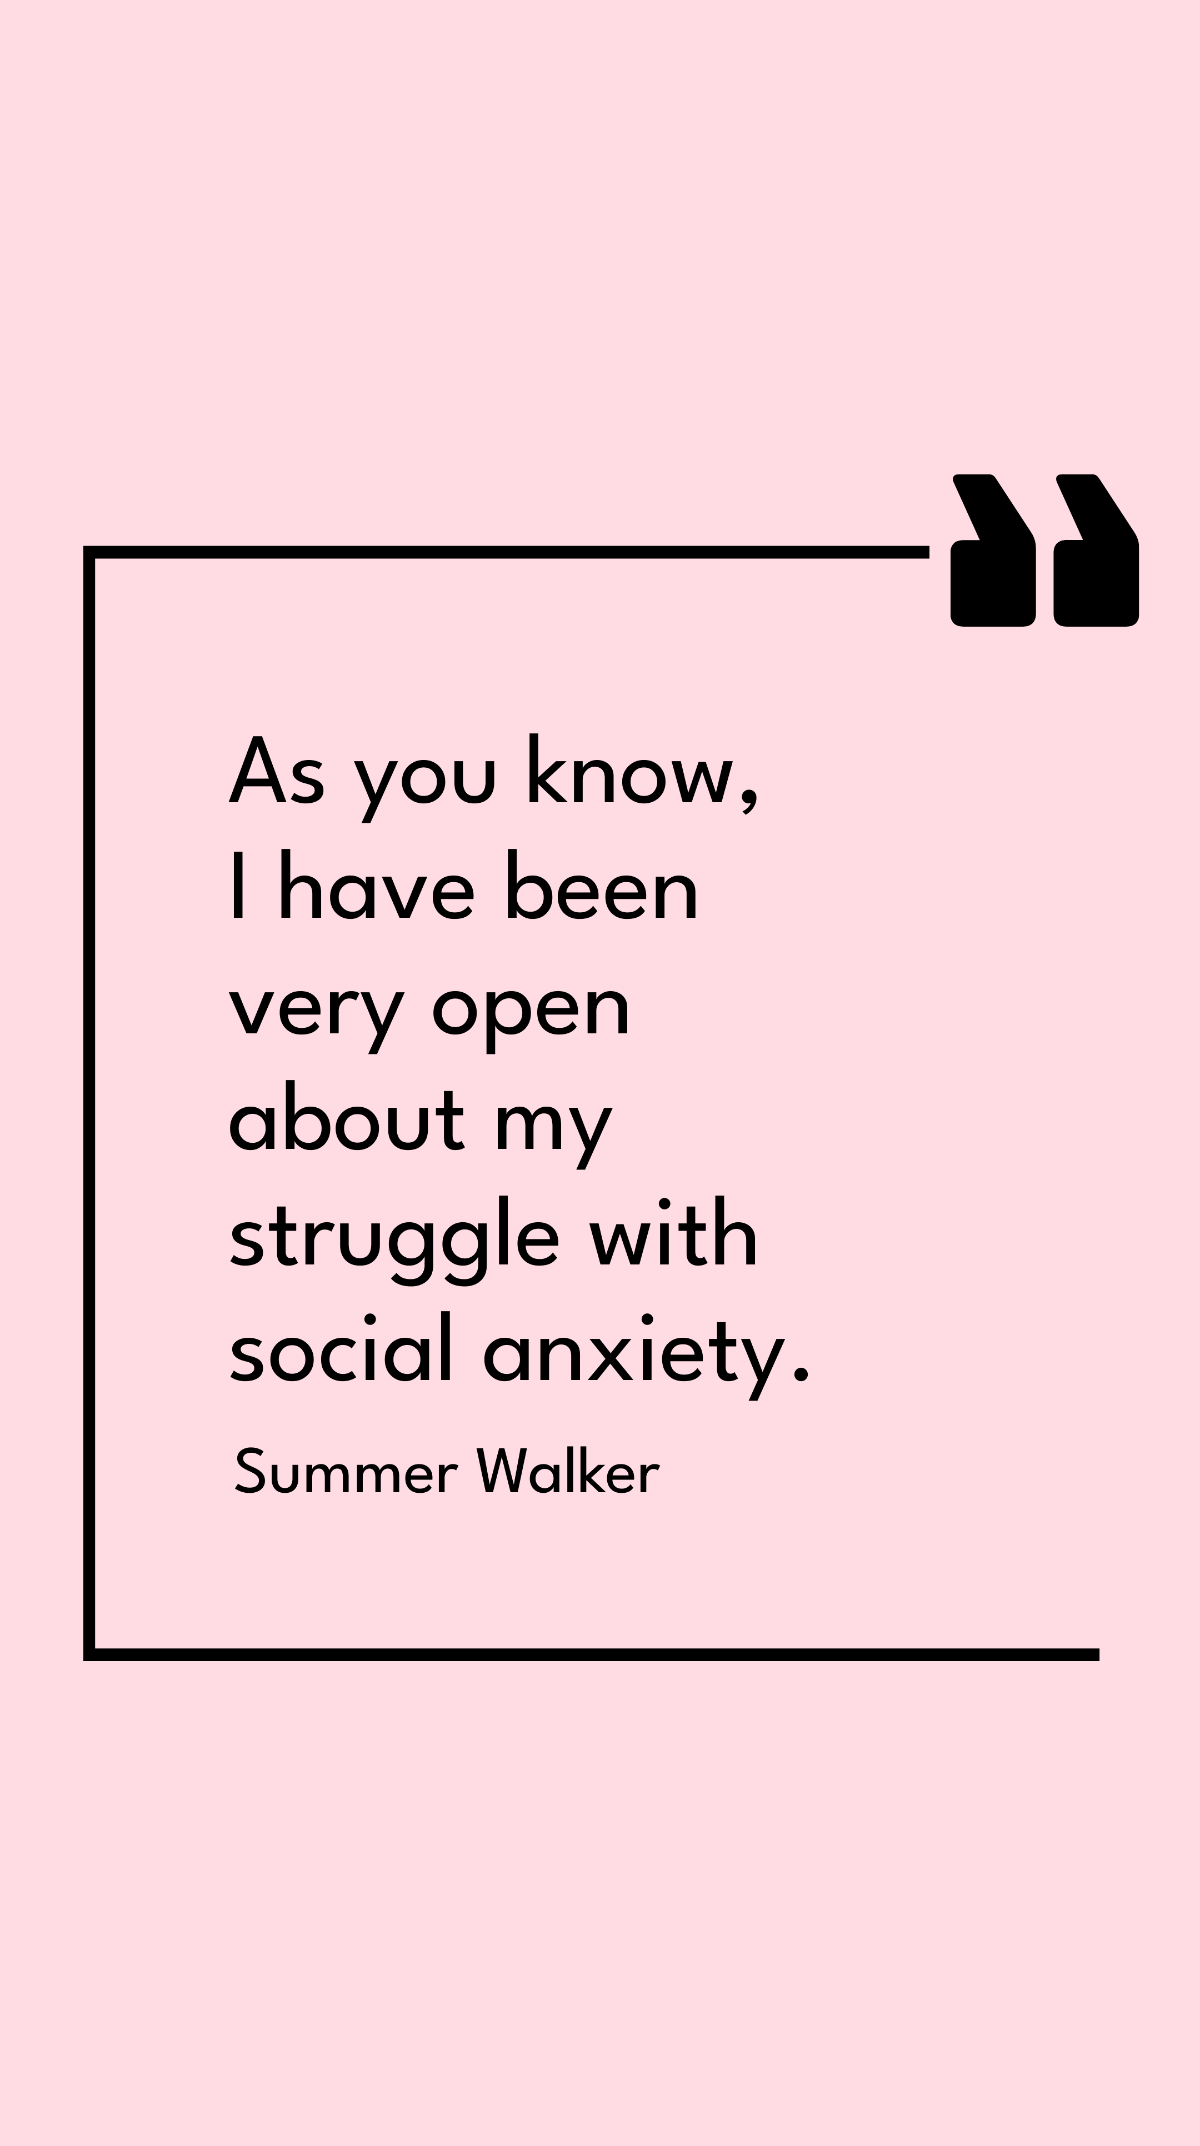 Free Summer Walker - As you know, I have been very open about my struggle with social anxiety. Template